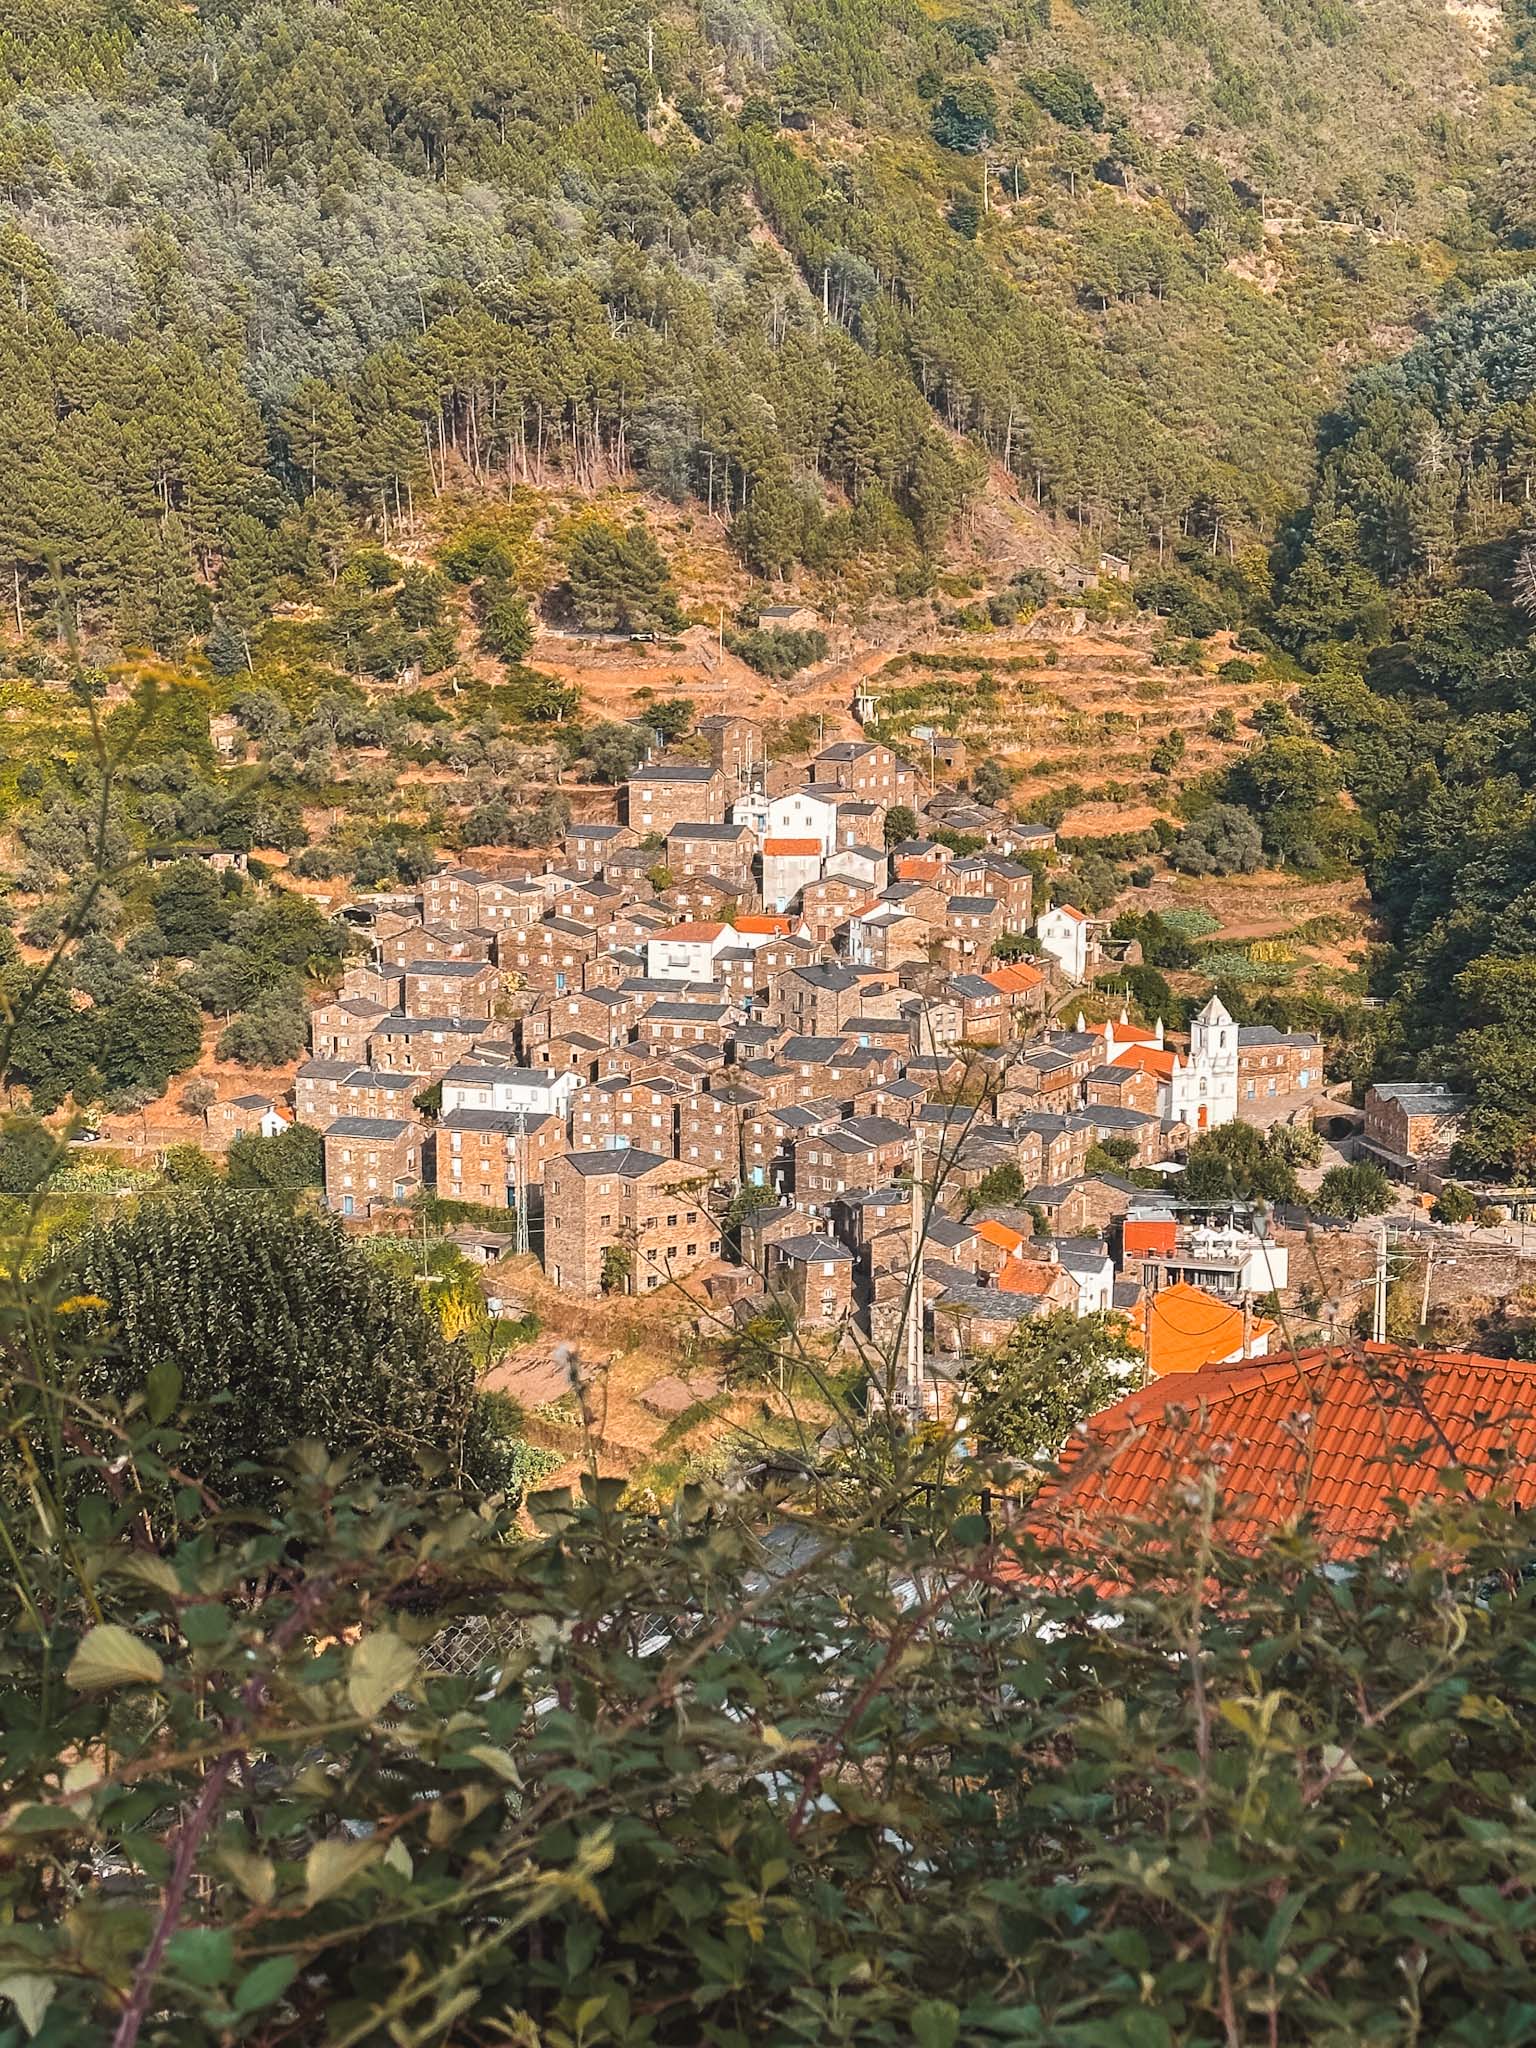 Piódão, one of the Historical Villages of Portugal